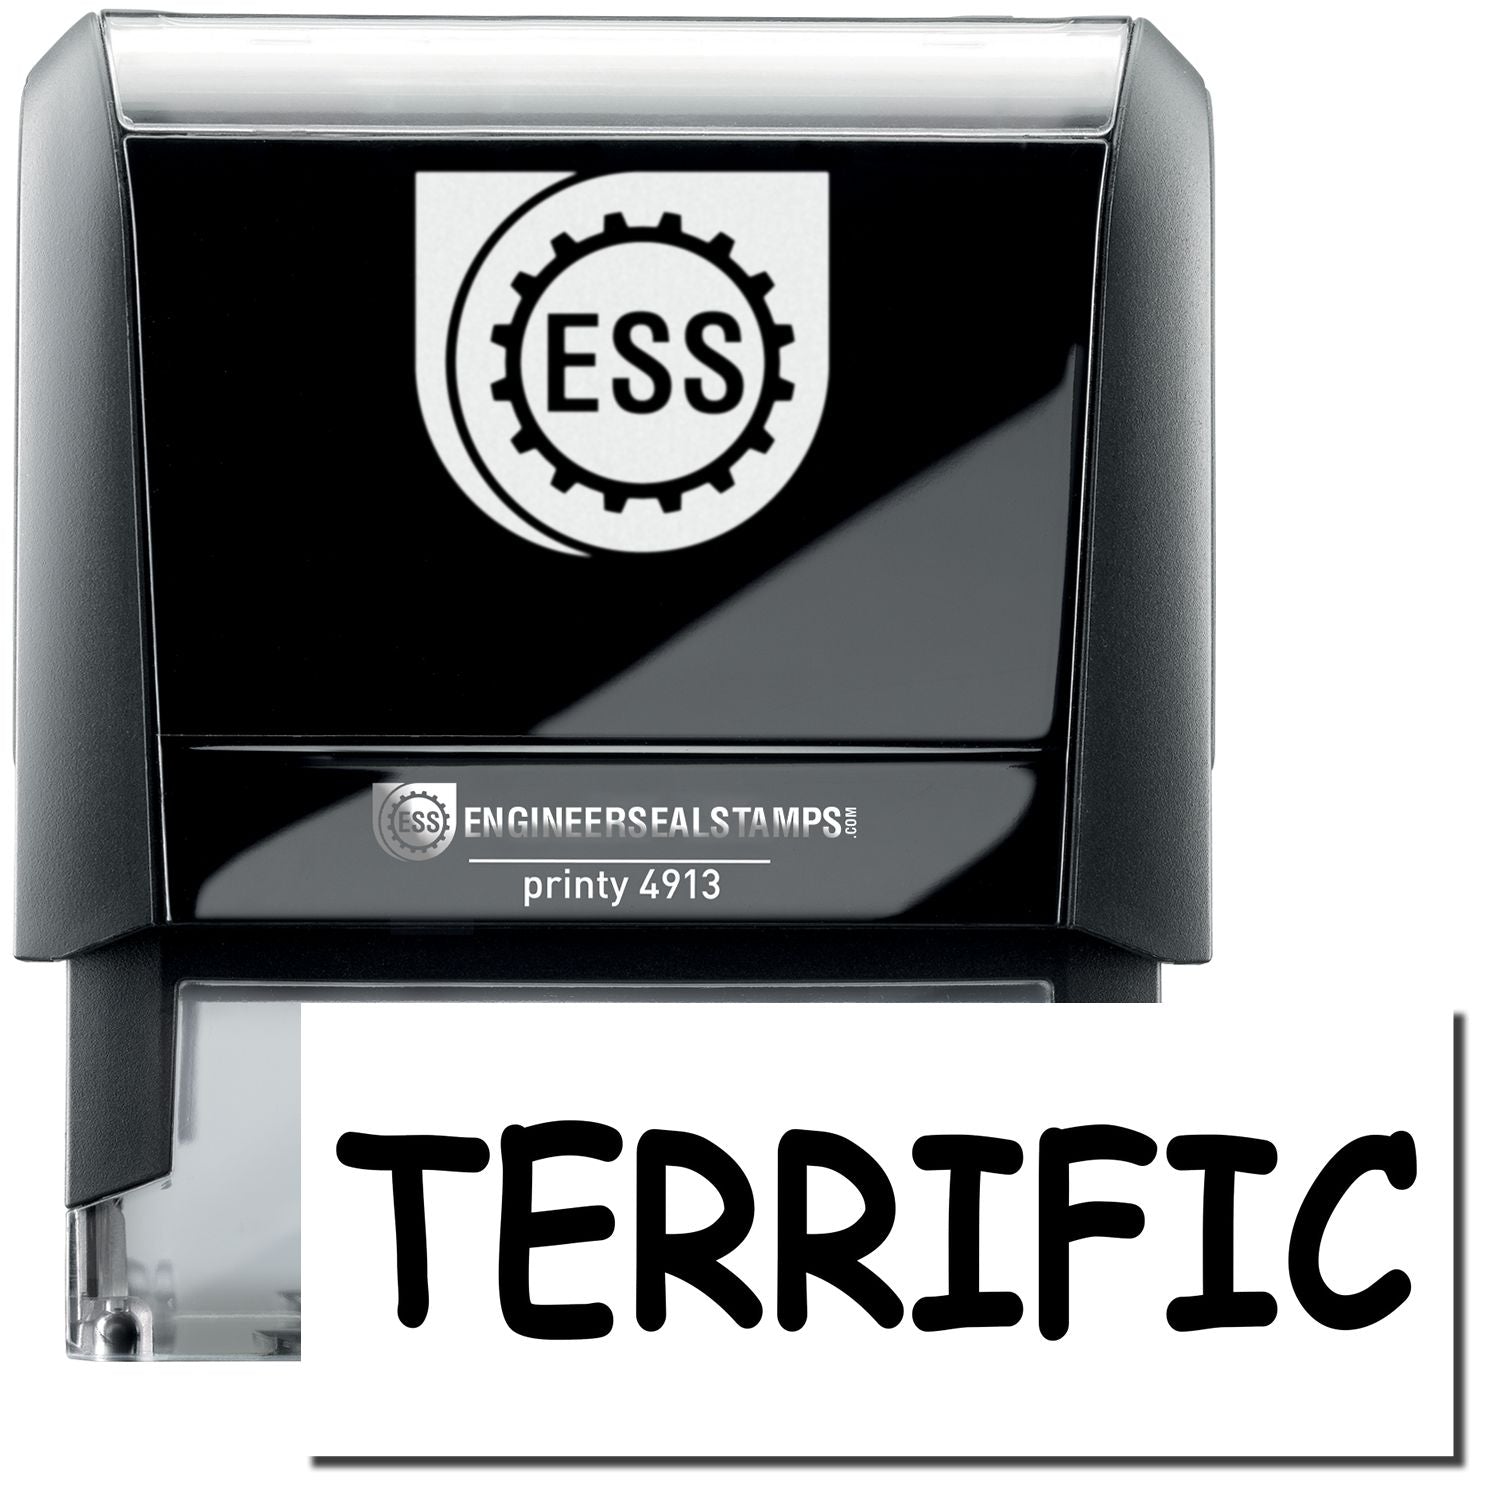 A self-inking stamp with a stamped image showing how the text "TERRIFIC" in a large bold font is displayed by it.